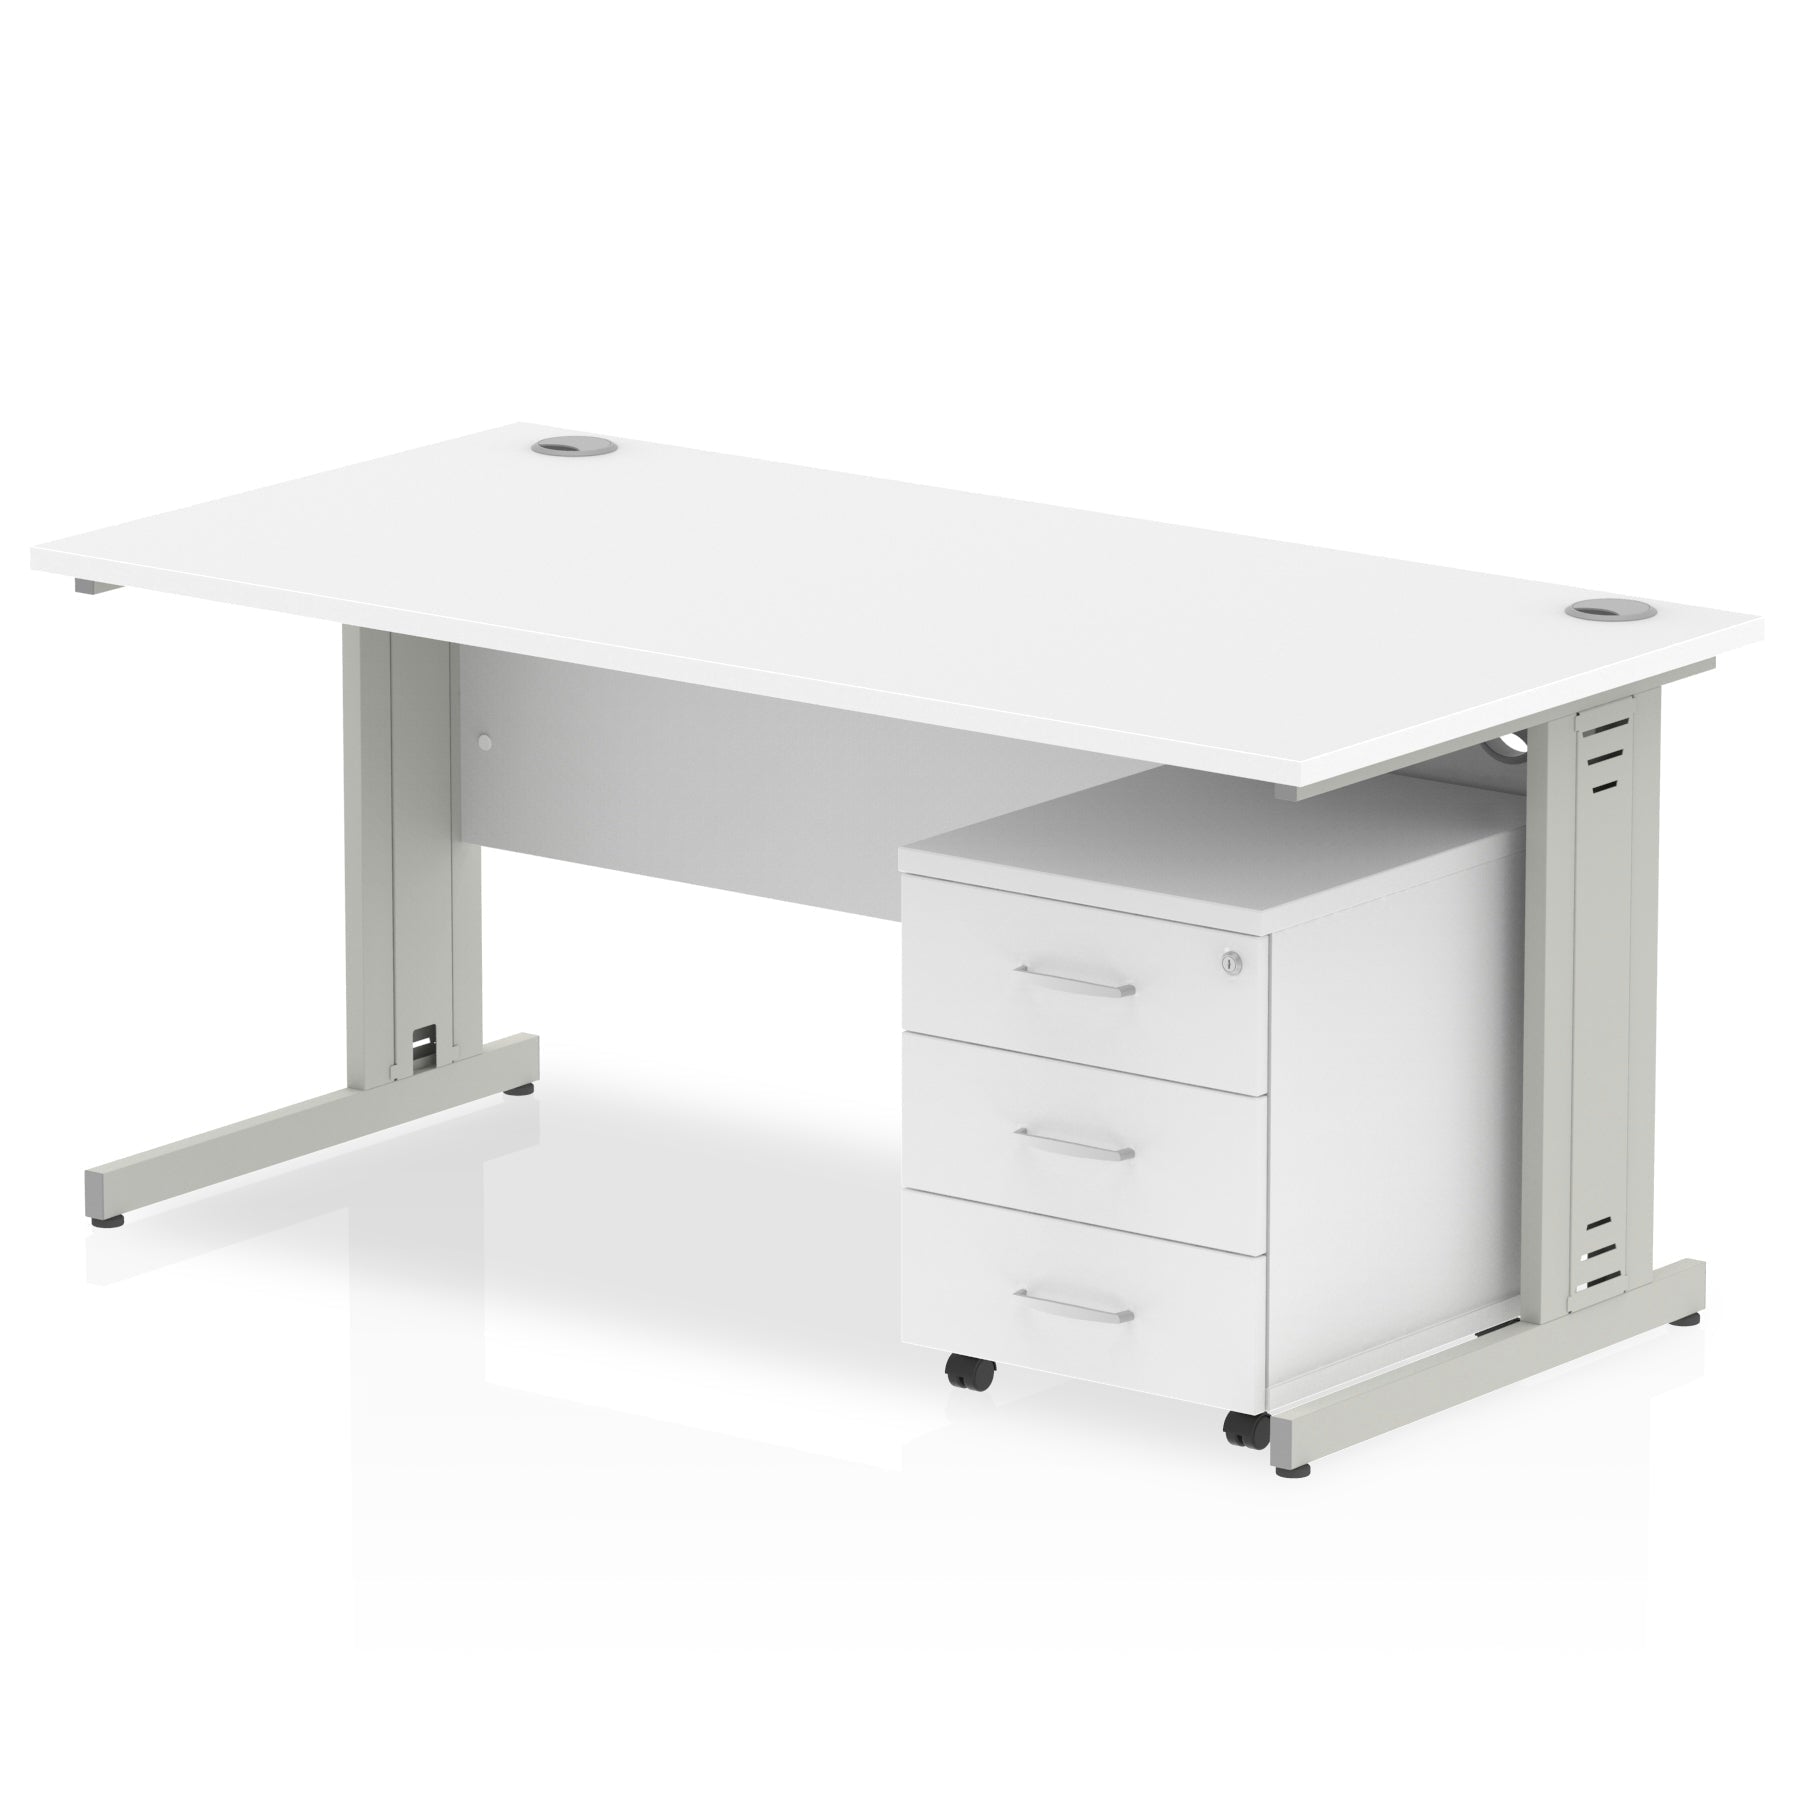 Impulse 1600mm Cable Managed Straight Desk w/ Mobile Pedestal - MFC Rectangular, Self-Assembly, 5-Year Guarantee, Lockable Drawers